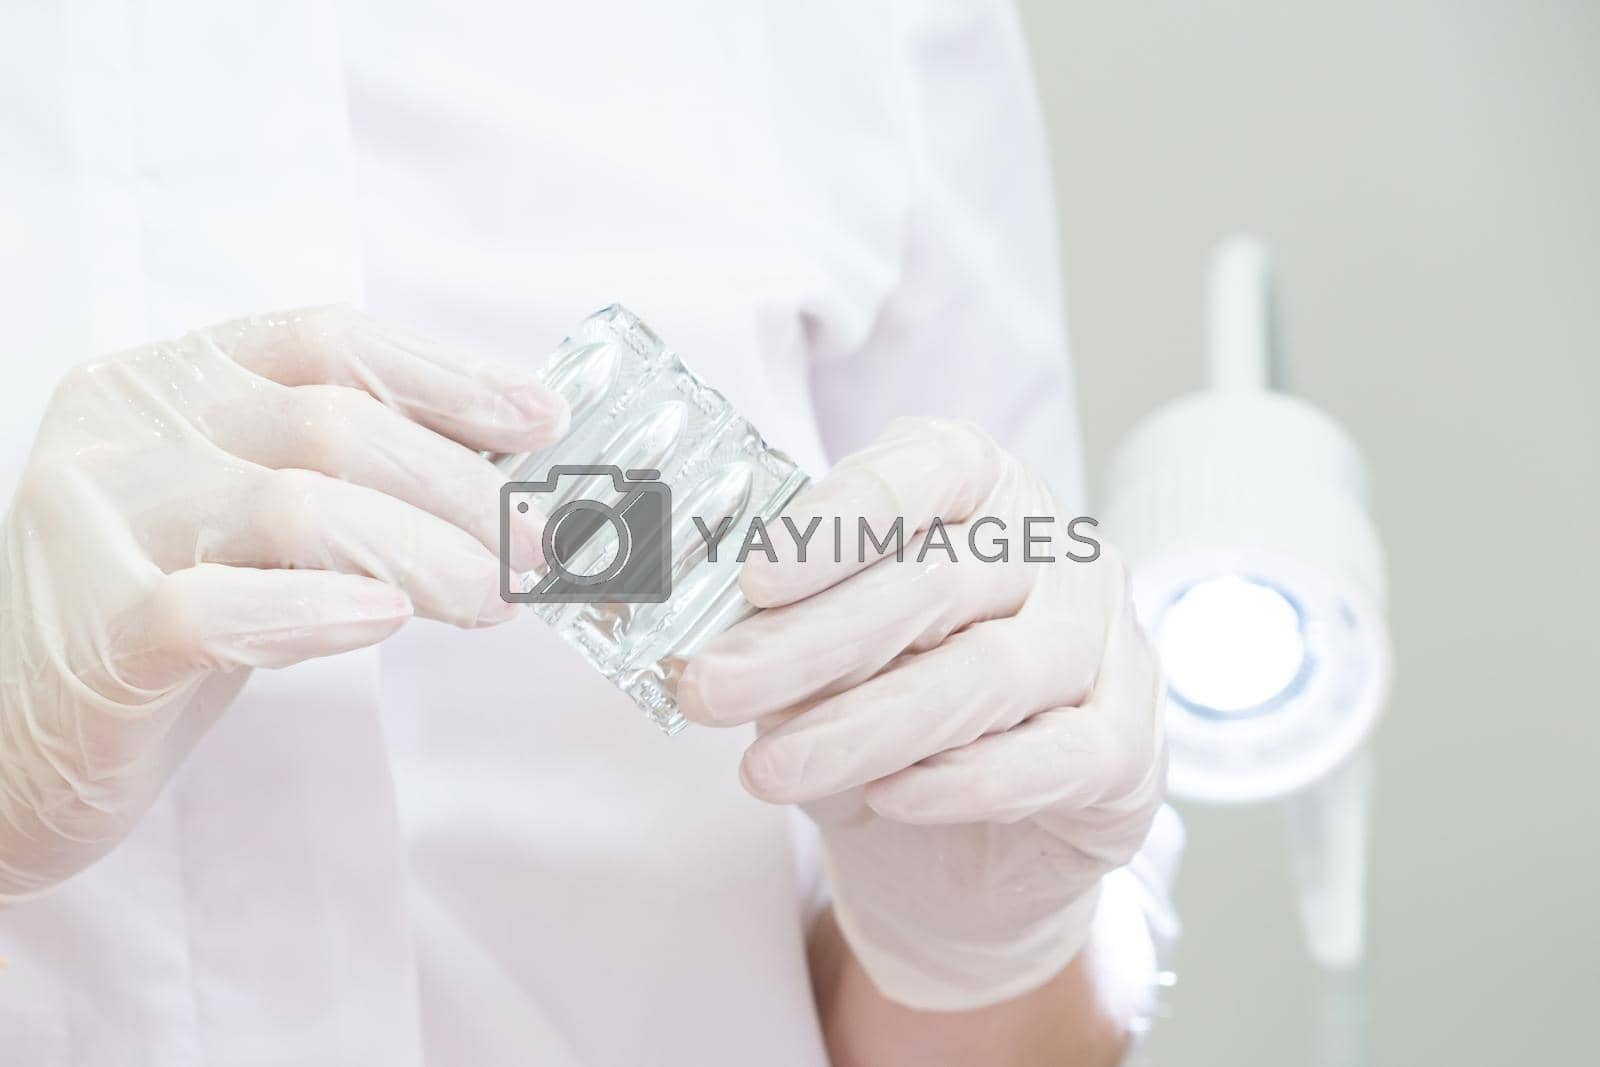 Royalty free image of Doctor wearing medical gloves holding a pack of rectal or vaginal suppositories by Mariakray